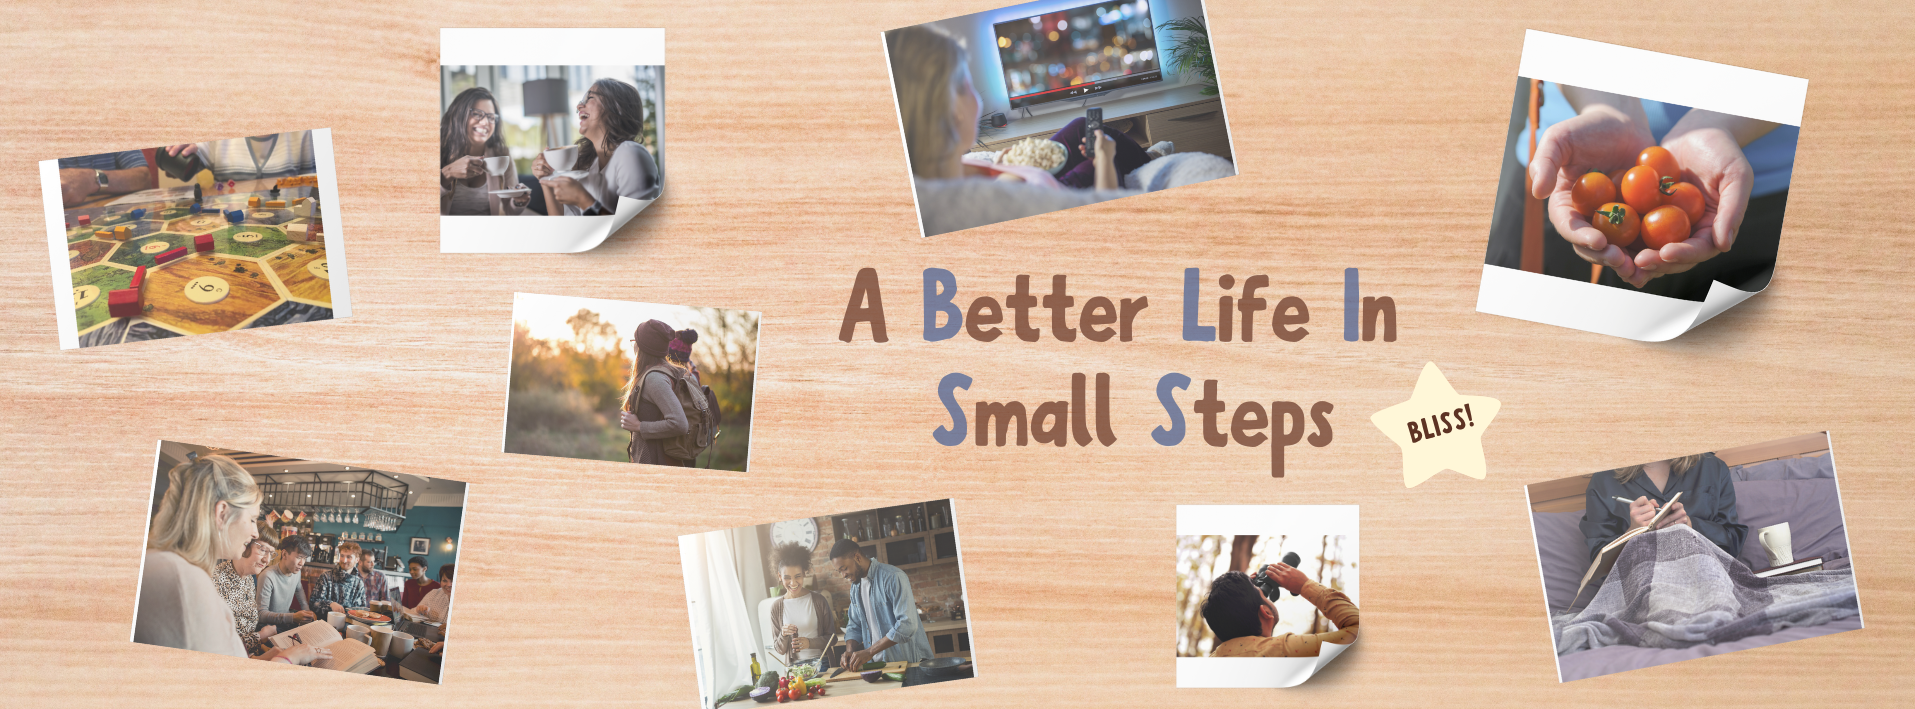 A Better Life in Small Steps